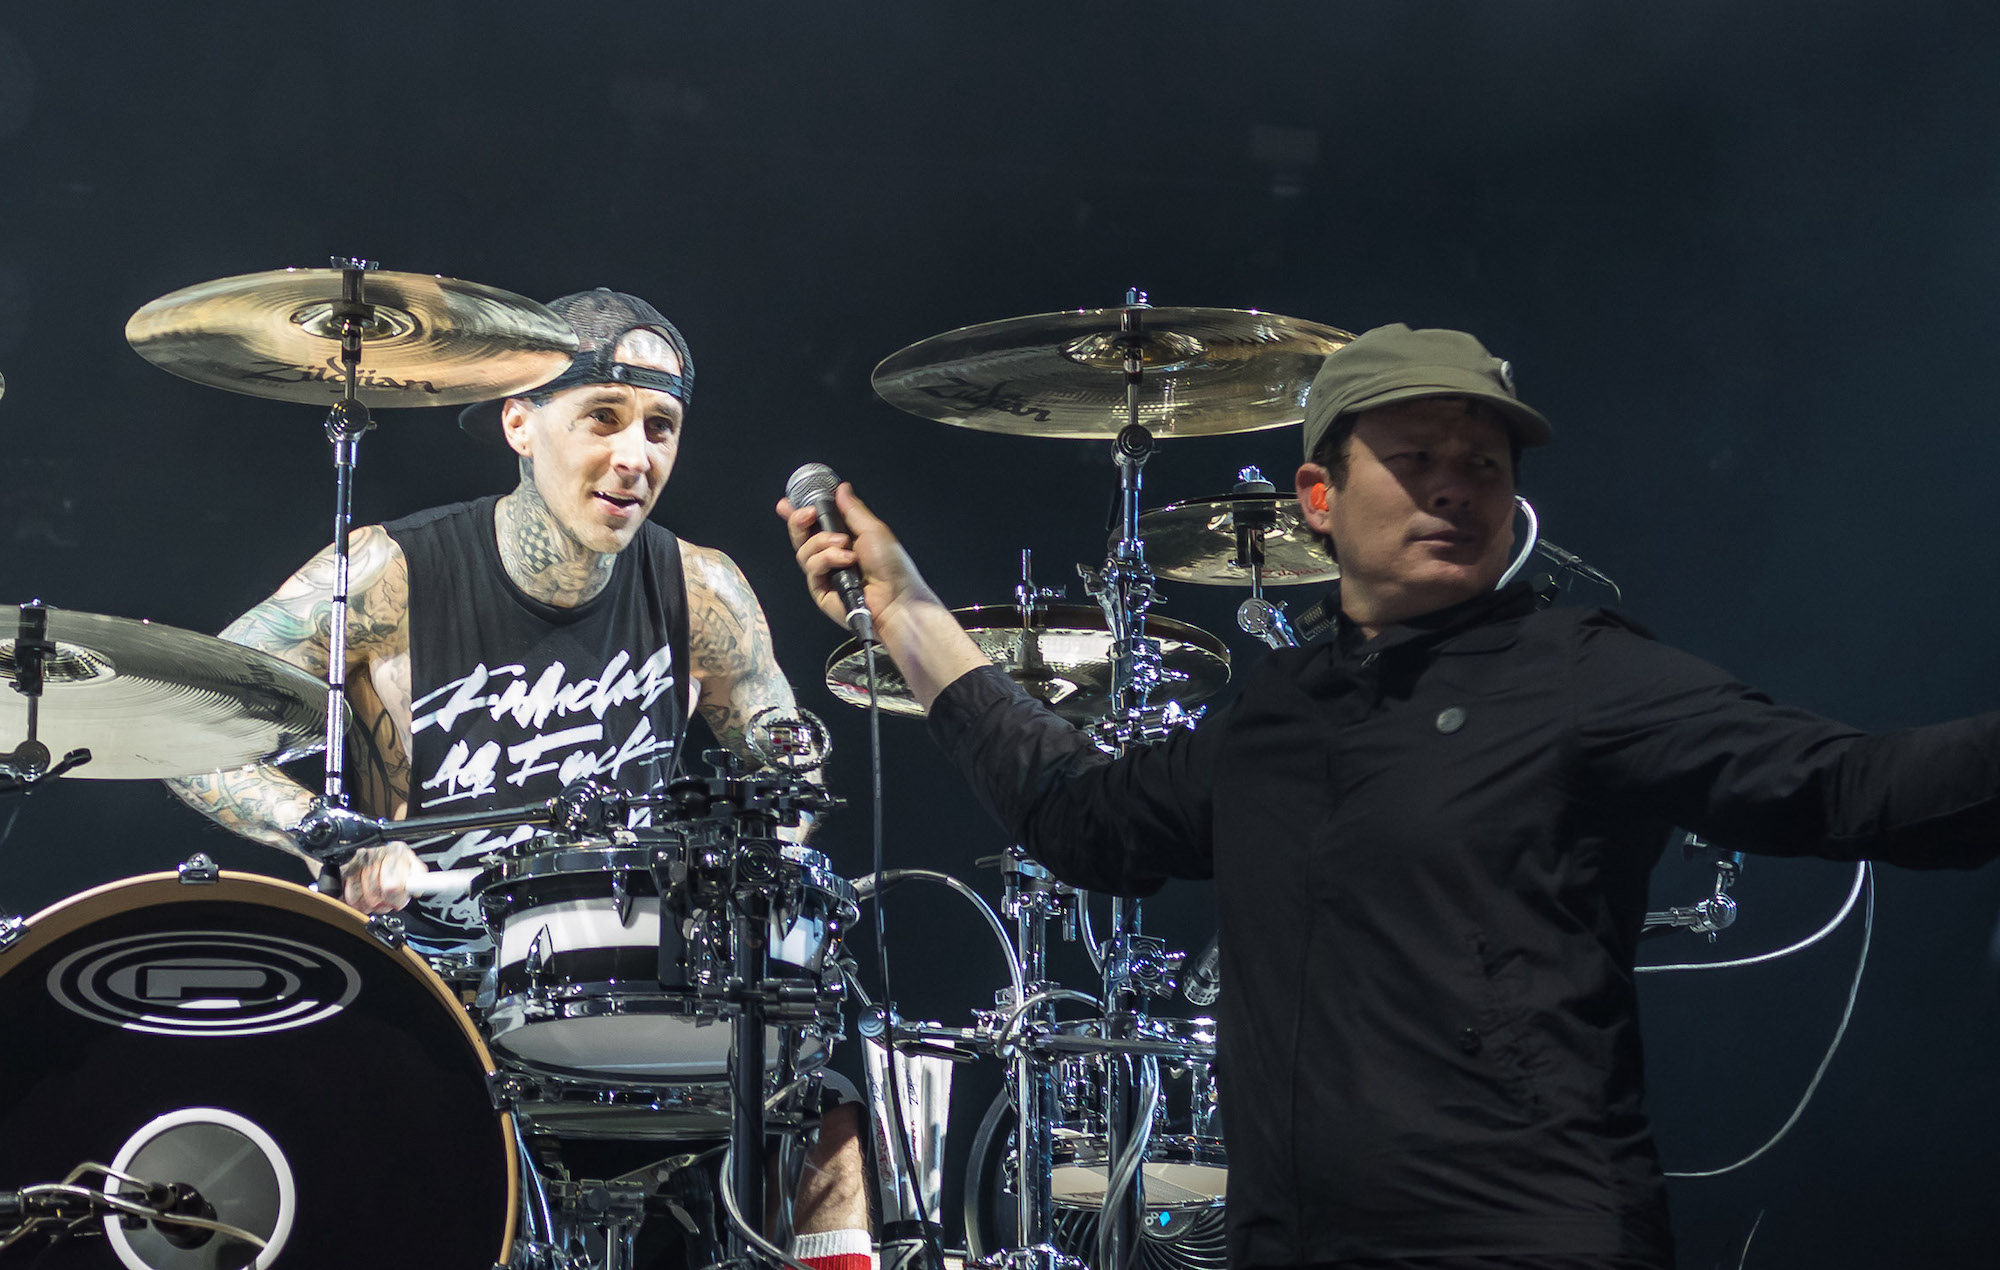 Tom DeLonge has talked to Travis Barker about a Box Car Racer reunion